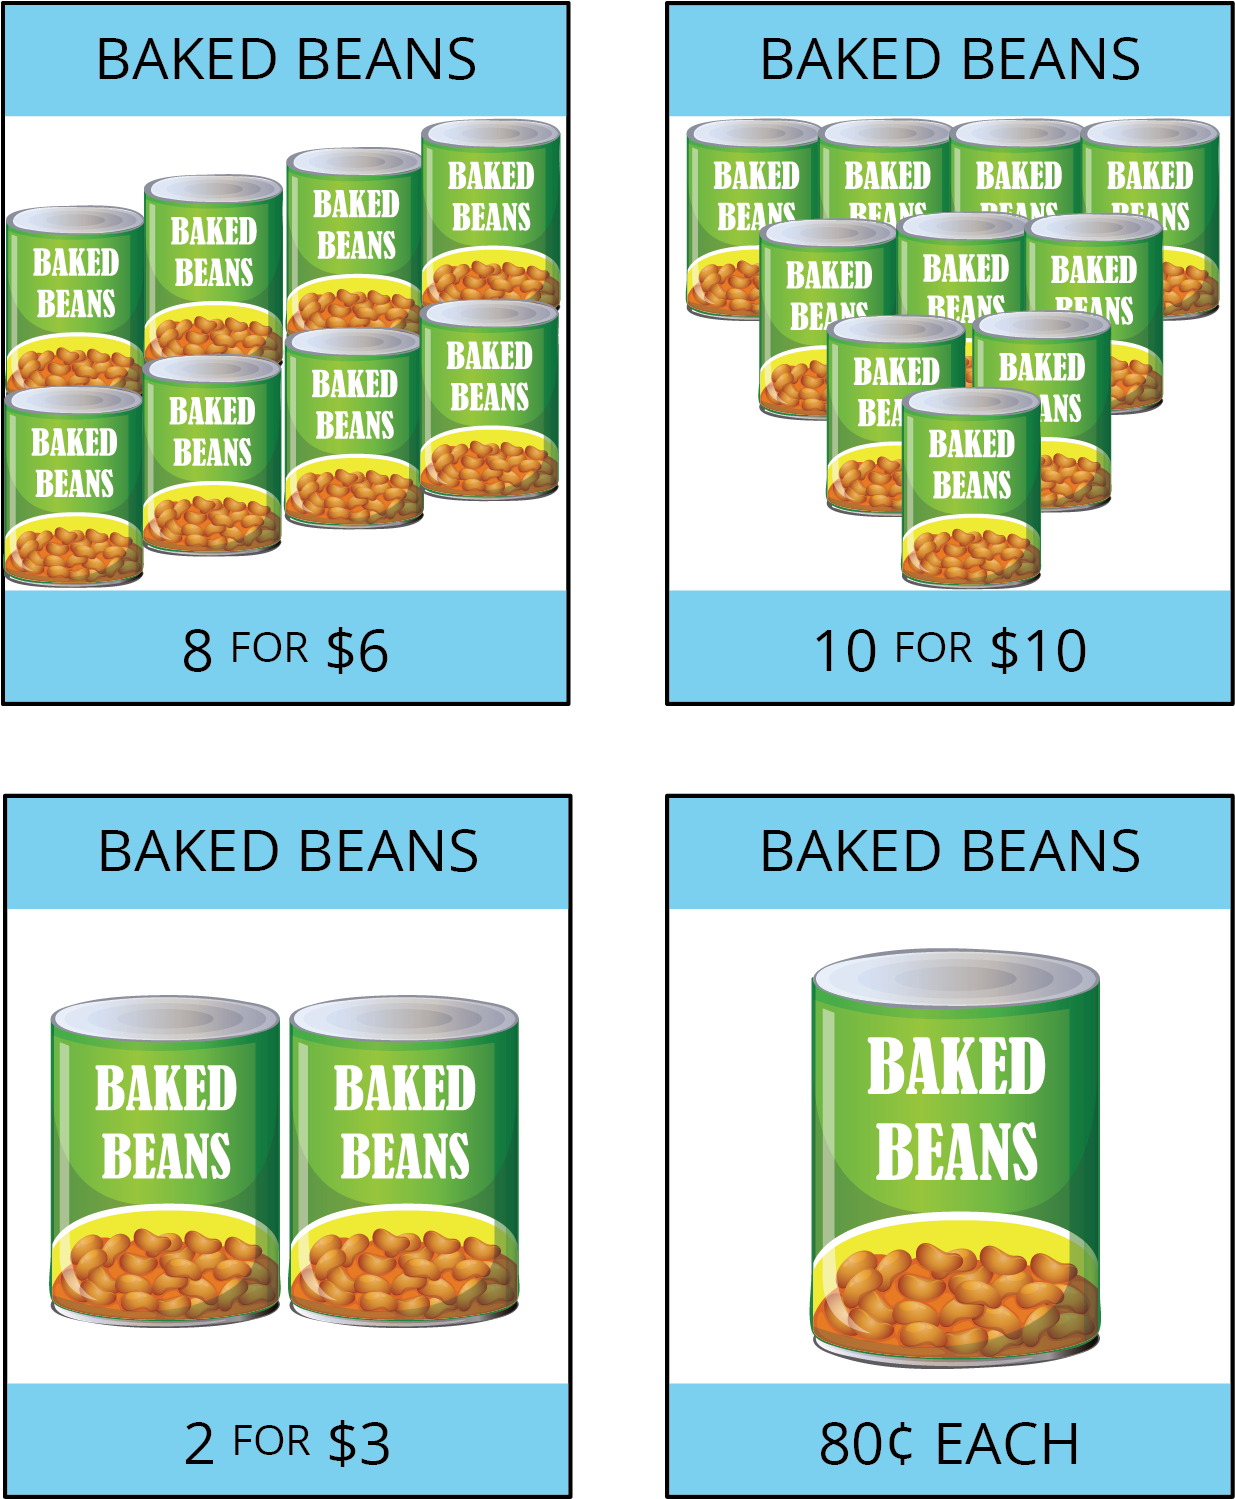 Four different images of ads for baked beans. The first ad has 8 cans of beans and is labeled 8 for 6 dollars. The second ad shows 10 cans of beans and is labeled 10 for 10 dollars. The third ad shows 2 cans of beans and is labeled 2 for 3 dollars. The fourth ad shows 1 can of beans and is labeled 80 cents each.